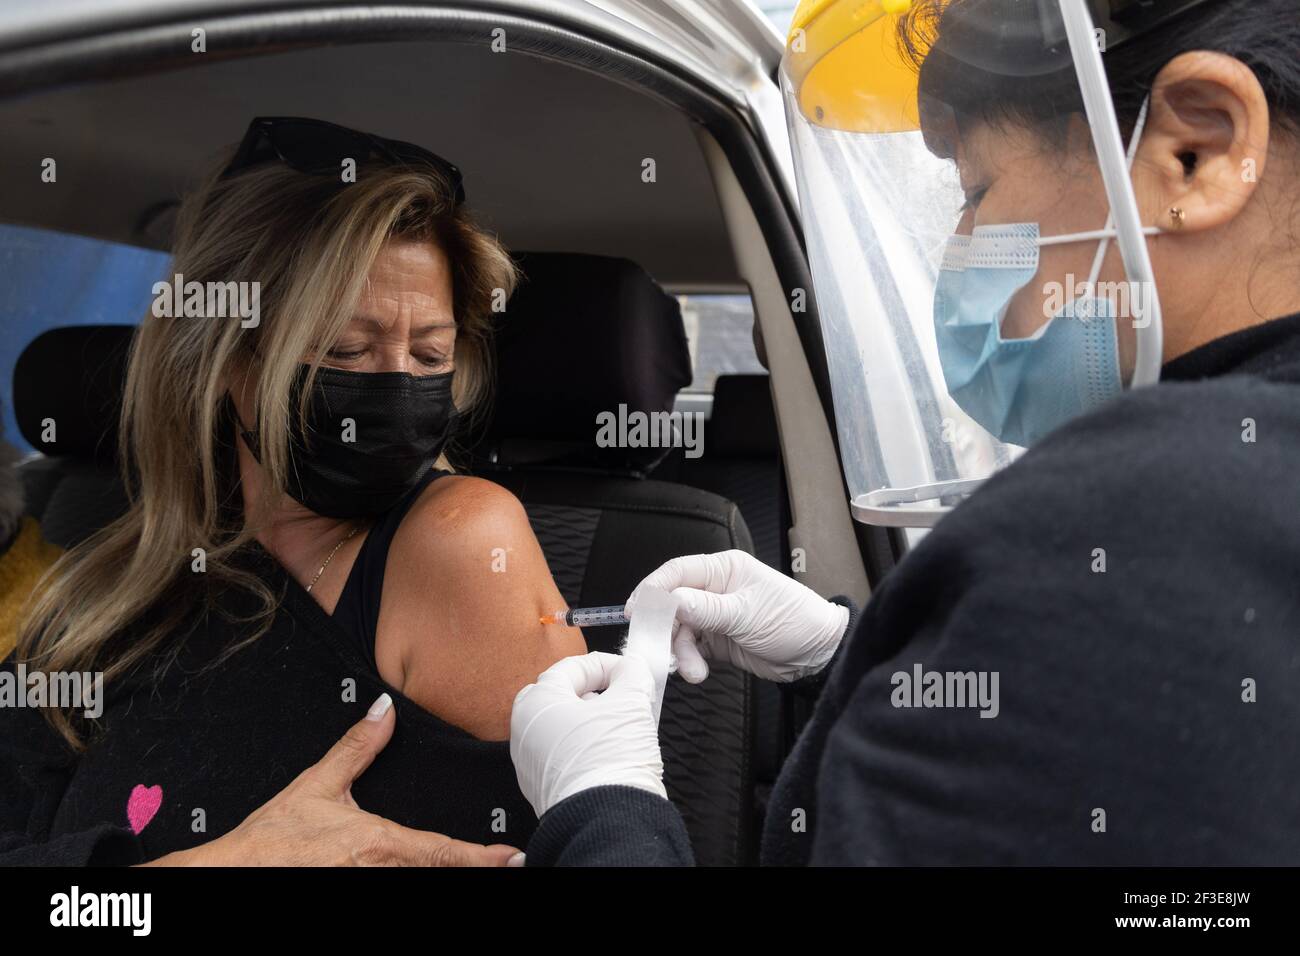 Santiago, Metropolitana, Chile. 16th Mar, 2021. A woman is vaccinated with a dose of the Sinovac COVID-19 vaccine at a drive-thru vaccination site in Santiago, Chile. So far, almost 5 million people have been vaccinated in the country, and 41% of them with the second dose. Credit: Matias Basualdo/ZUMA Wire/Alamy Live News Stock Photo